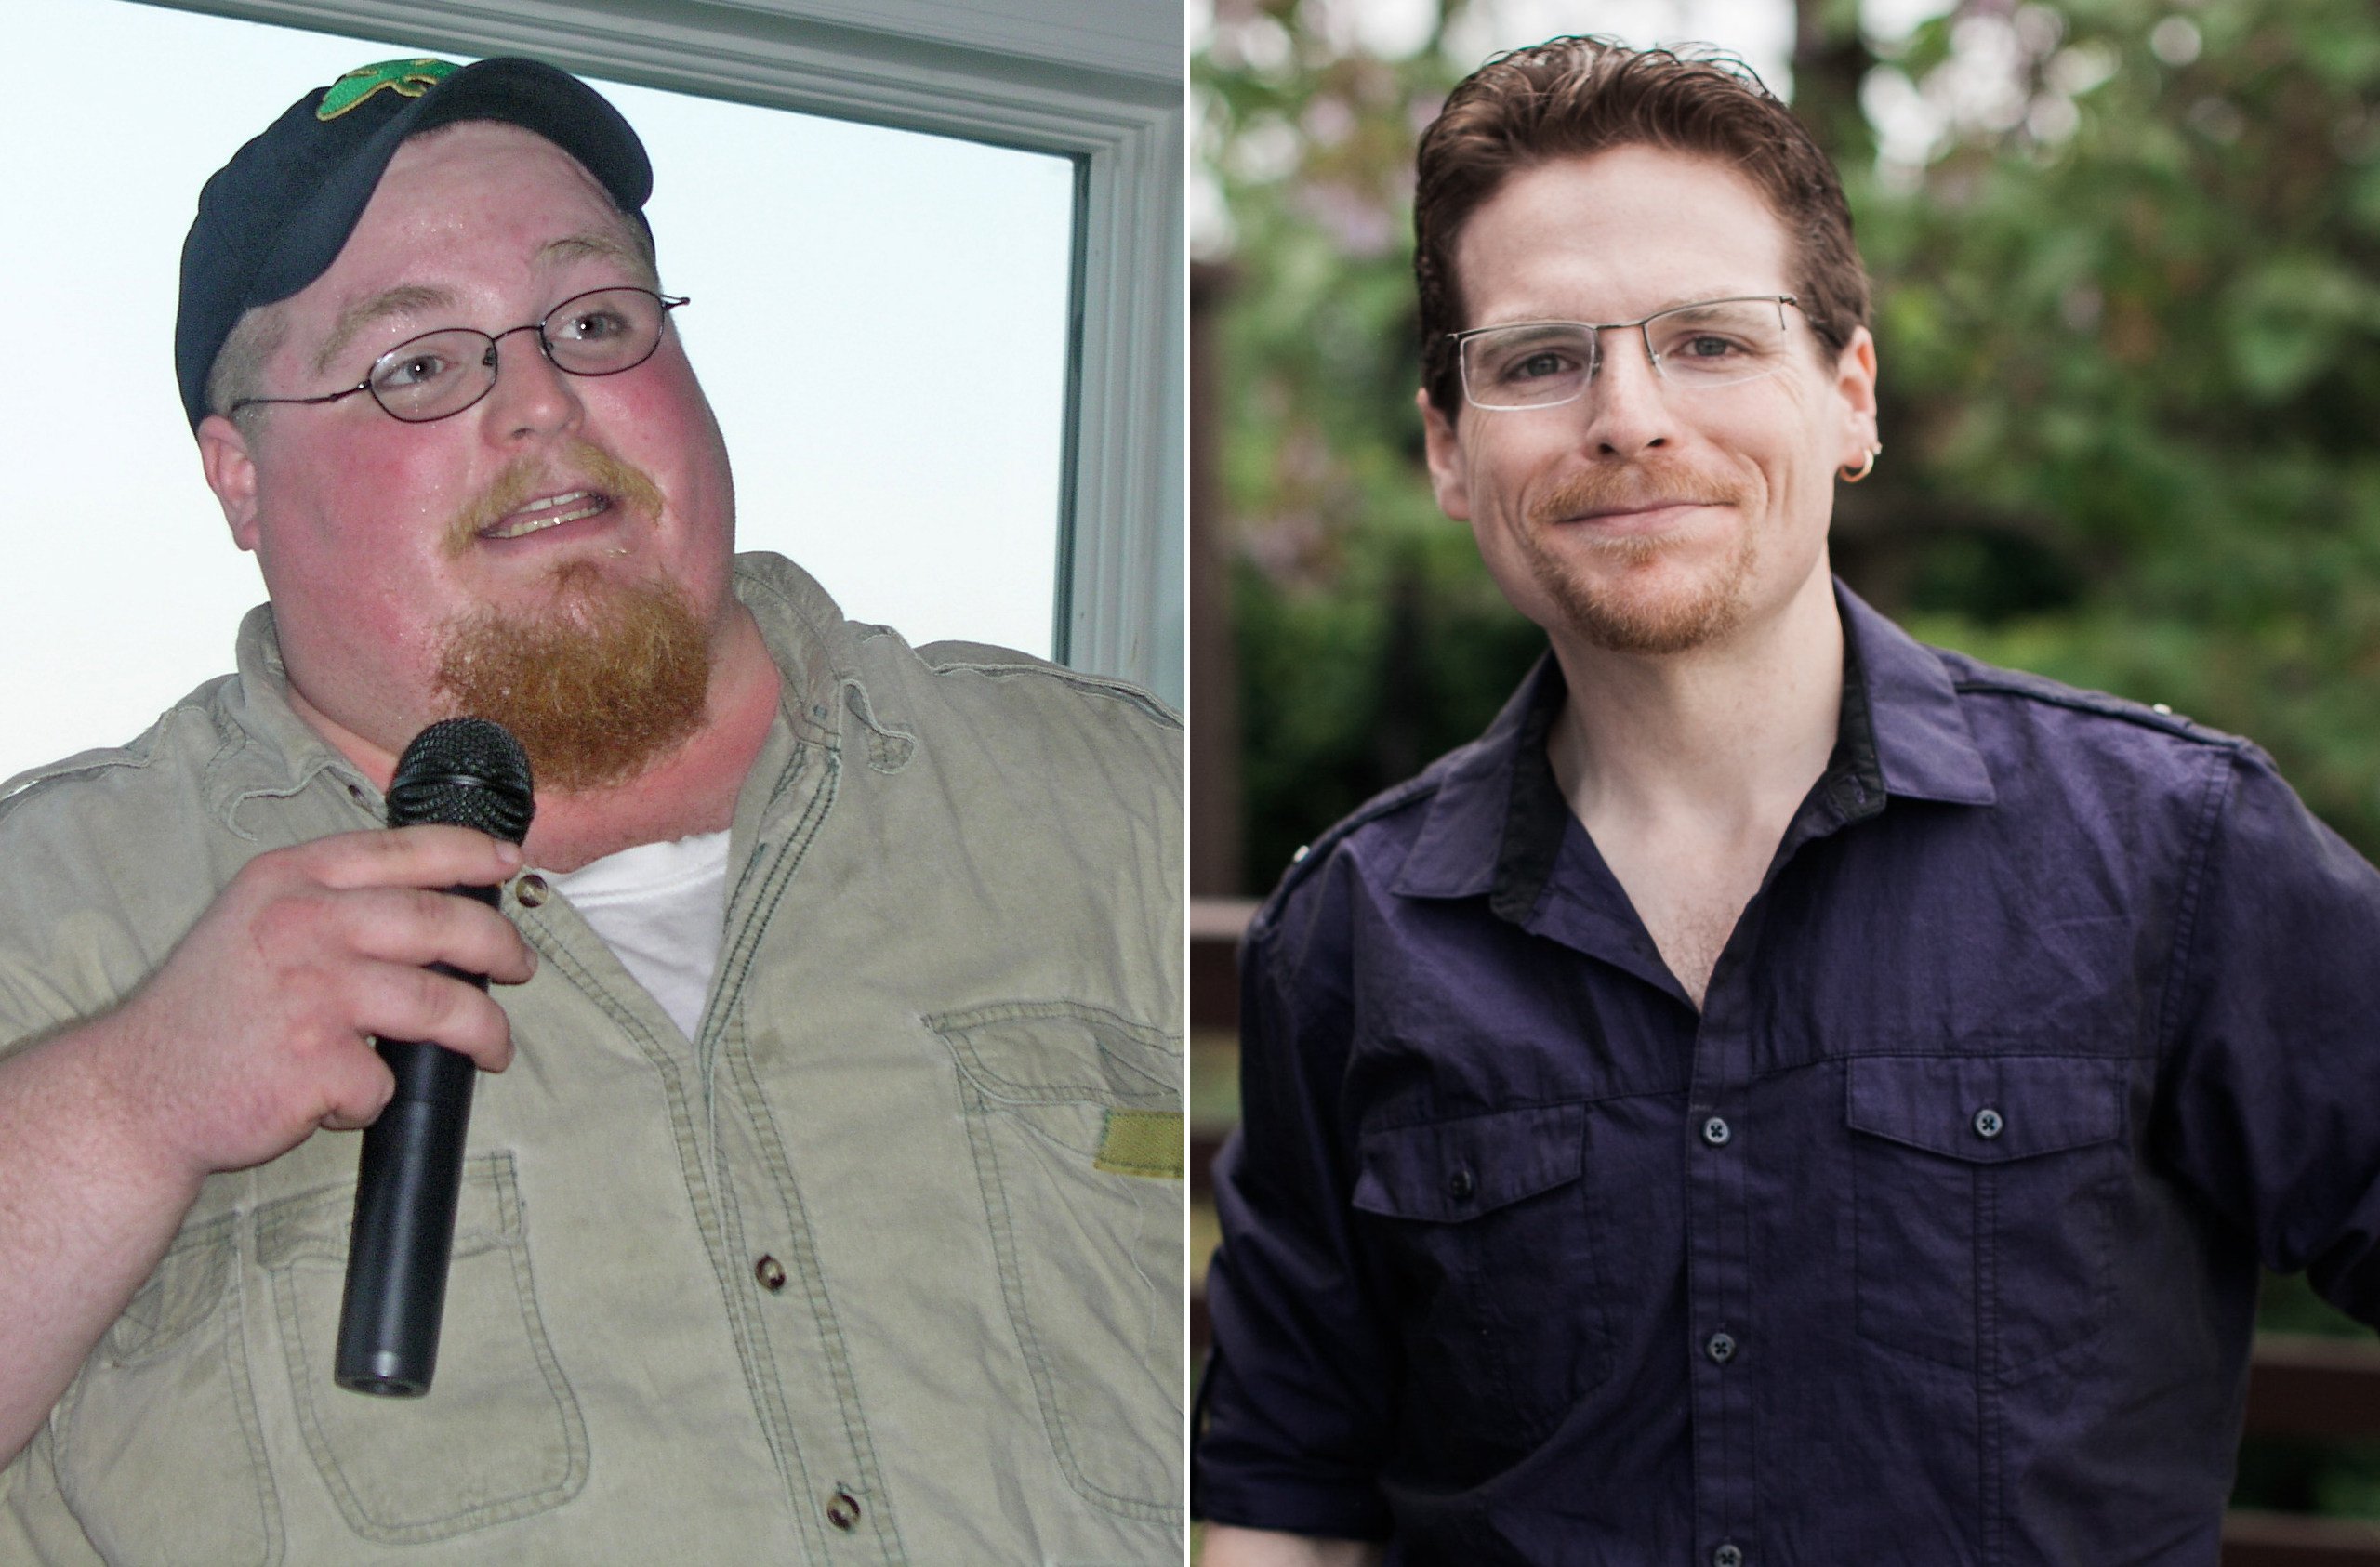 American podcaster Chuck Carroll, who grew up fat and addicted to junk food, describes his weight-loss journey – from a 190.5kg fast-food addict to a trim 63kg  advocate of the plant-based lifestyle (right). Photo: Chuck Carroll